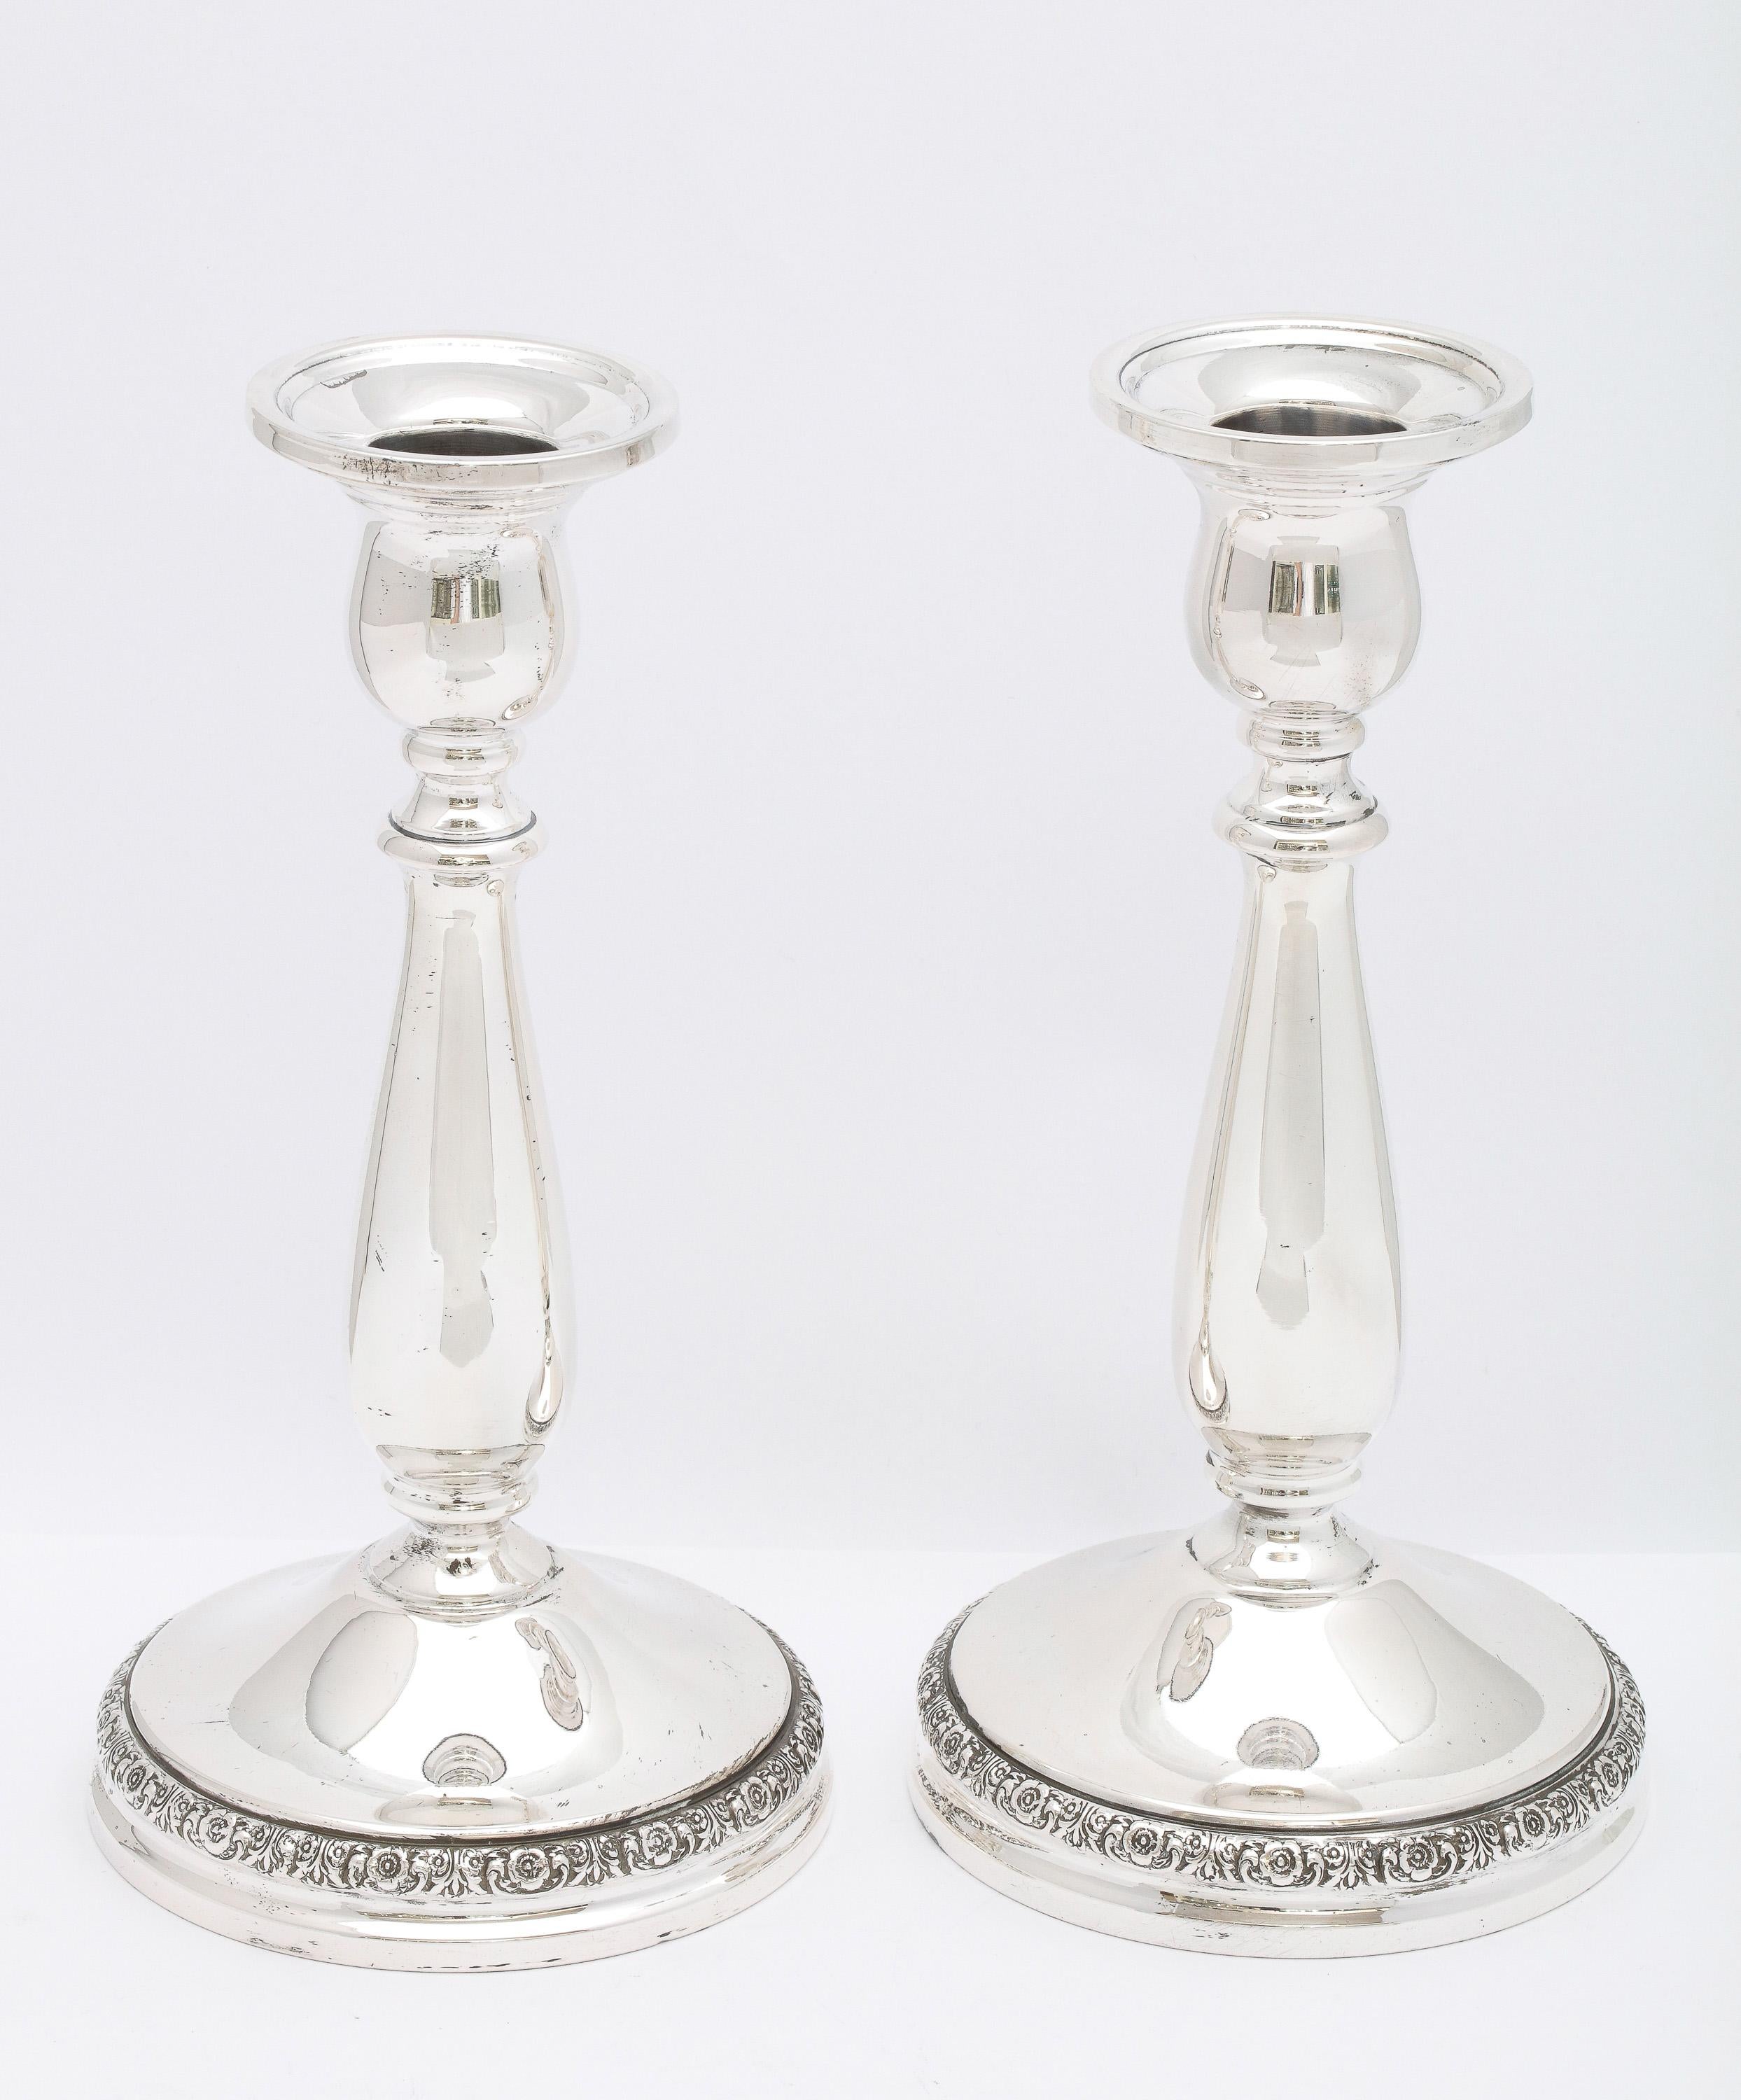 Pair of Victorian-Style sterling silver candlesticks, Simpson, Hall Miller Co. (division of International Silver Co), Meriden Connecticut, Ca. 1940's. Graceful design. The base edged in a tight, floral pattern. Measures 7 1/4 inches high x 3 3/4